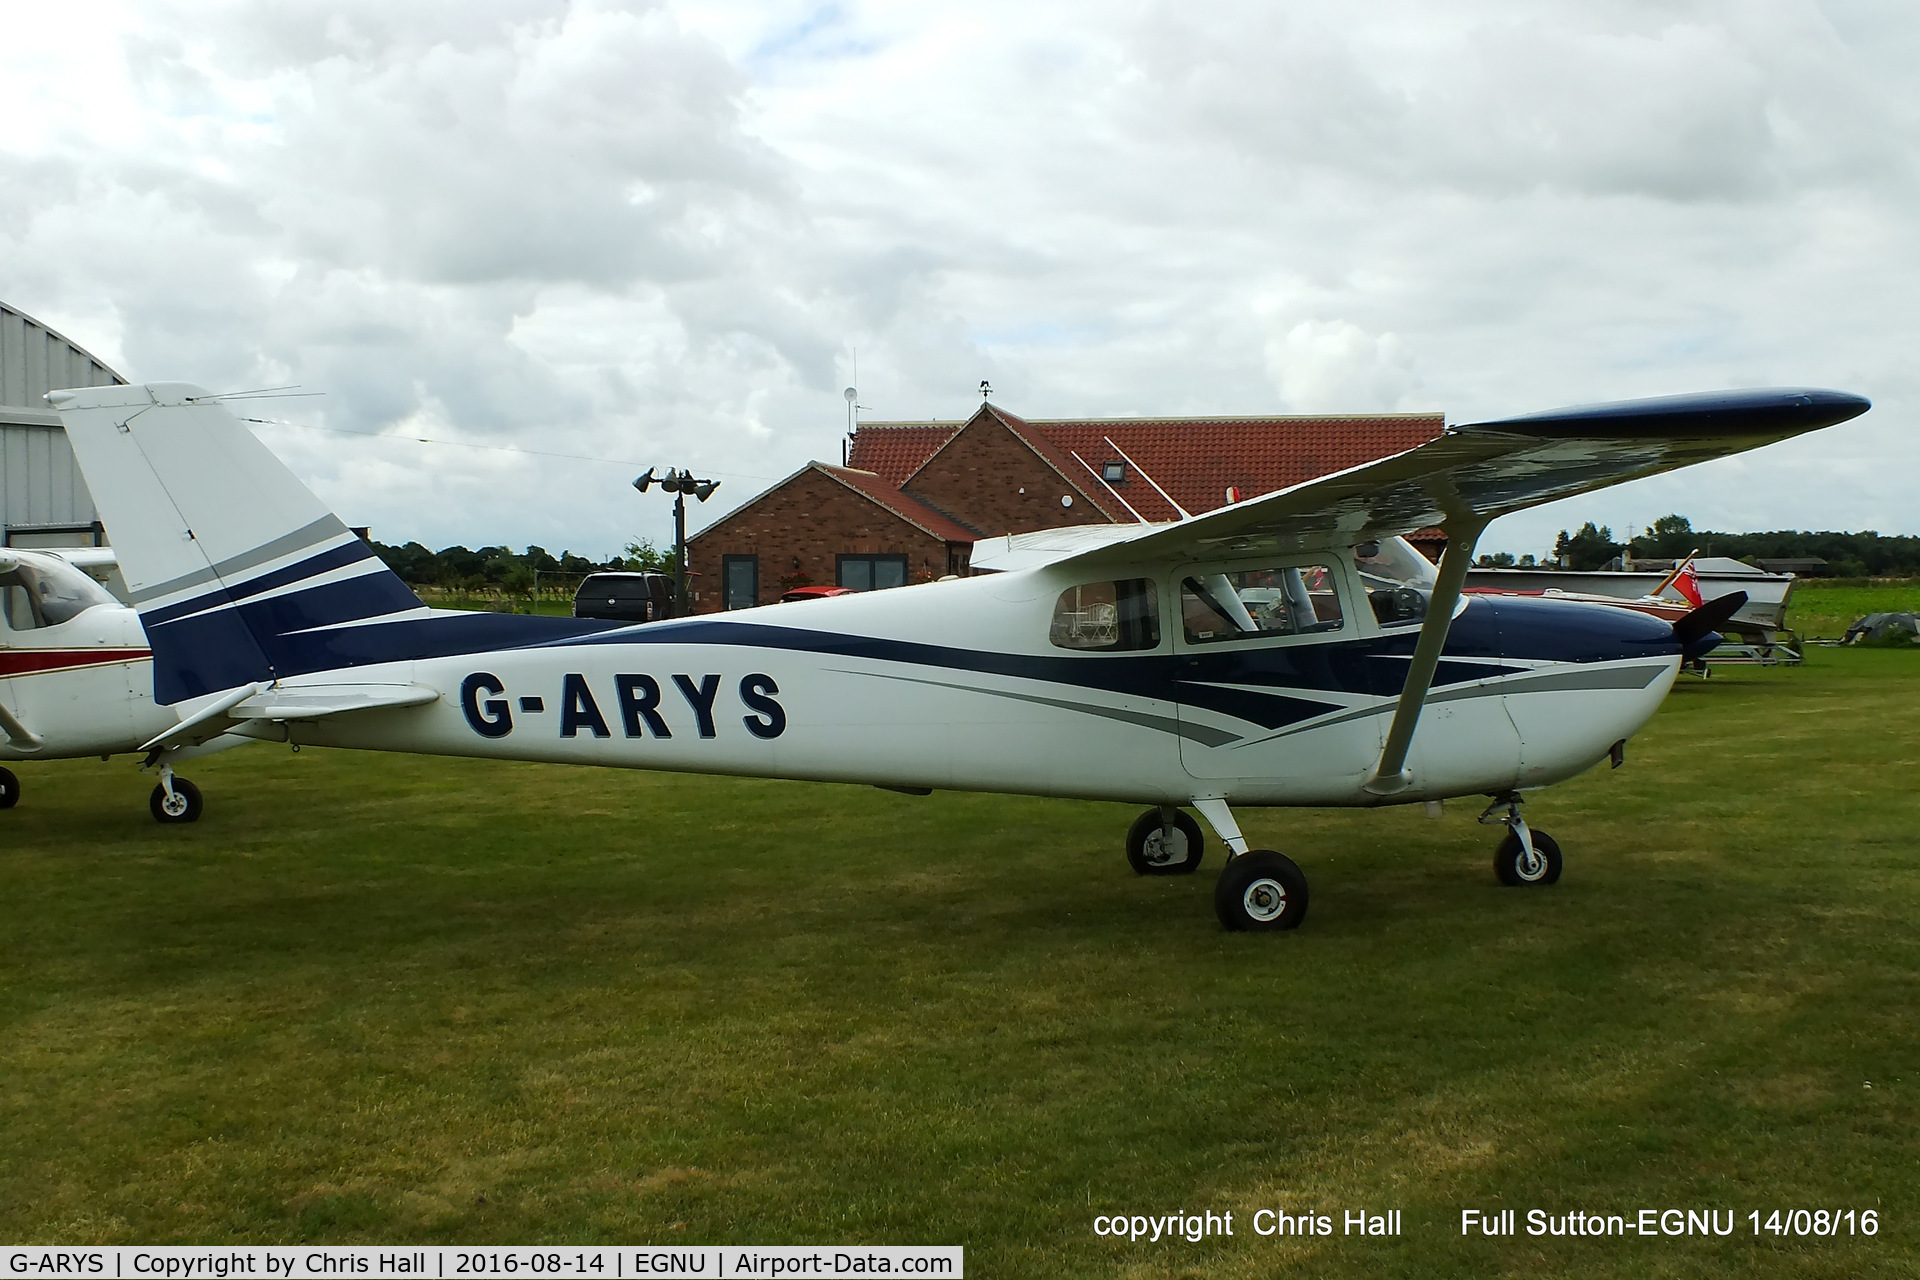 G-ARYS, 1962 Cessna 172C C/N 17249291, at the LAA Vale of York Strut fly-in, Full Sutton